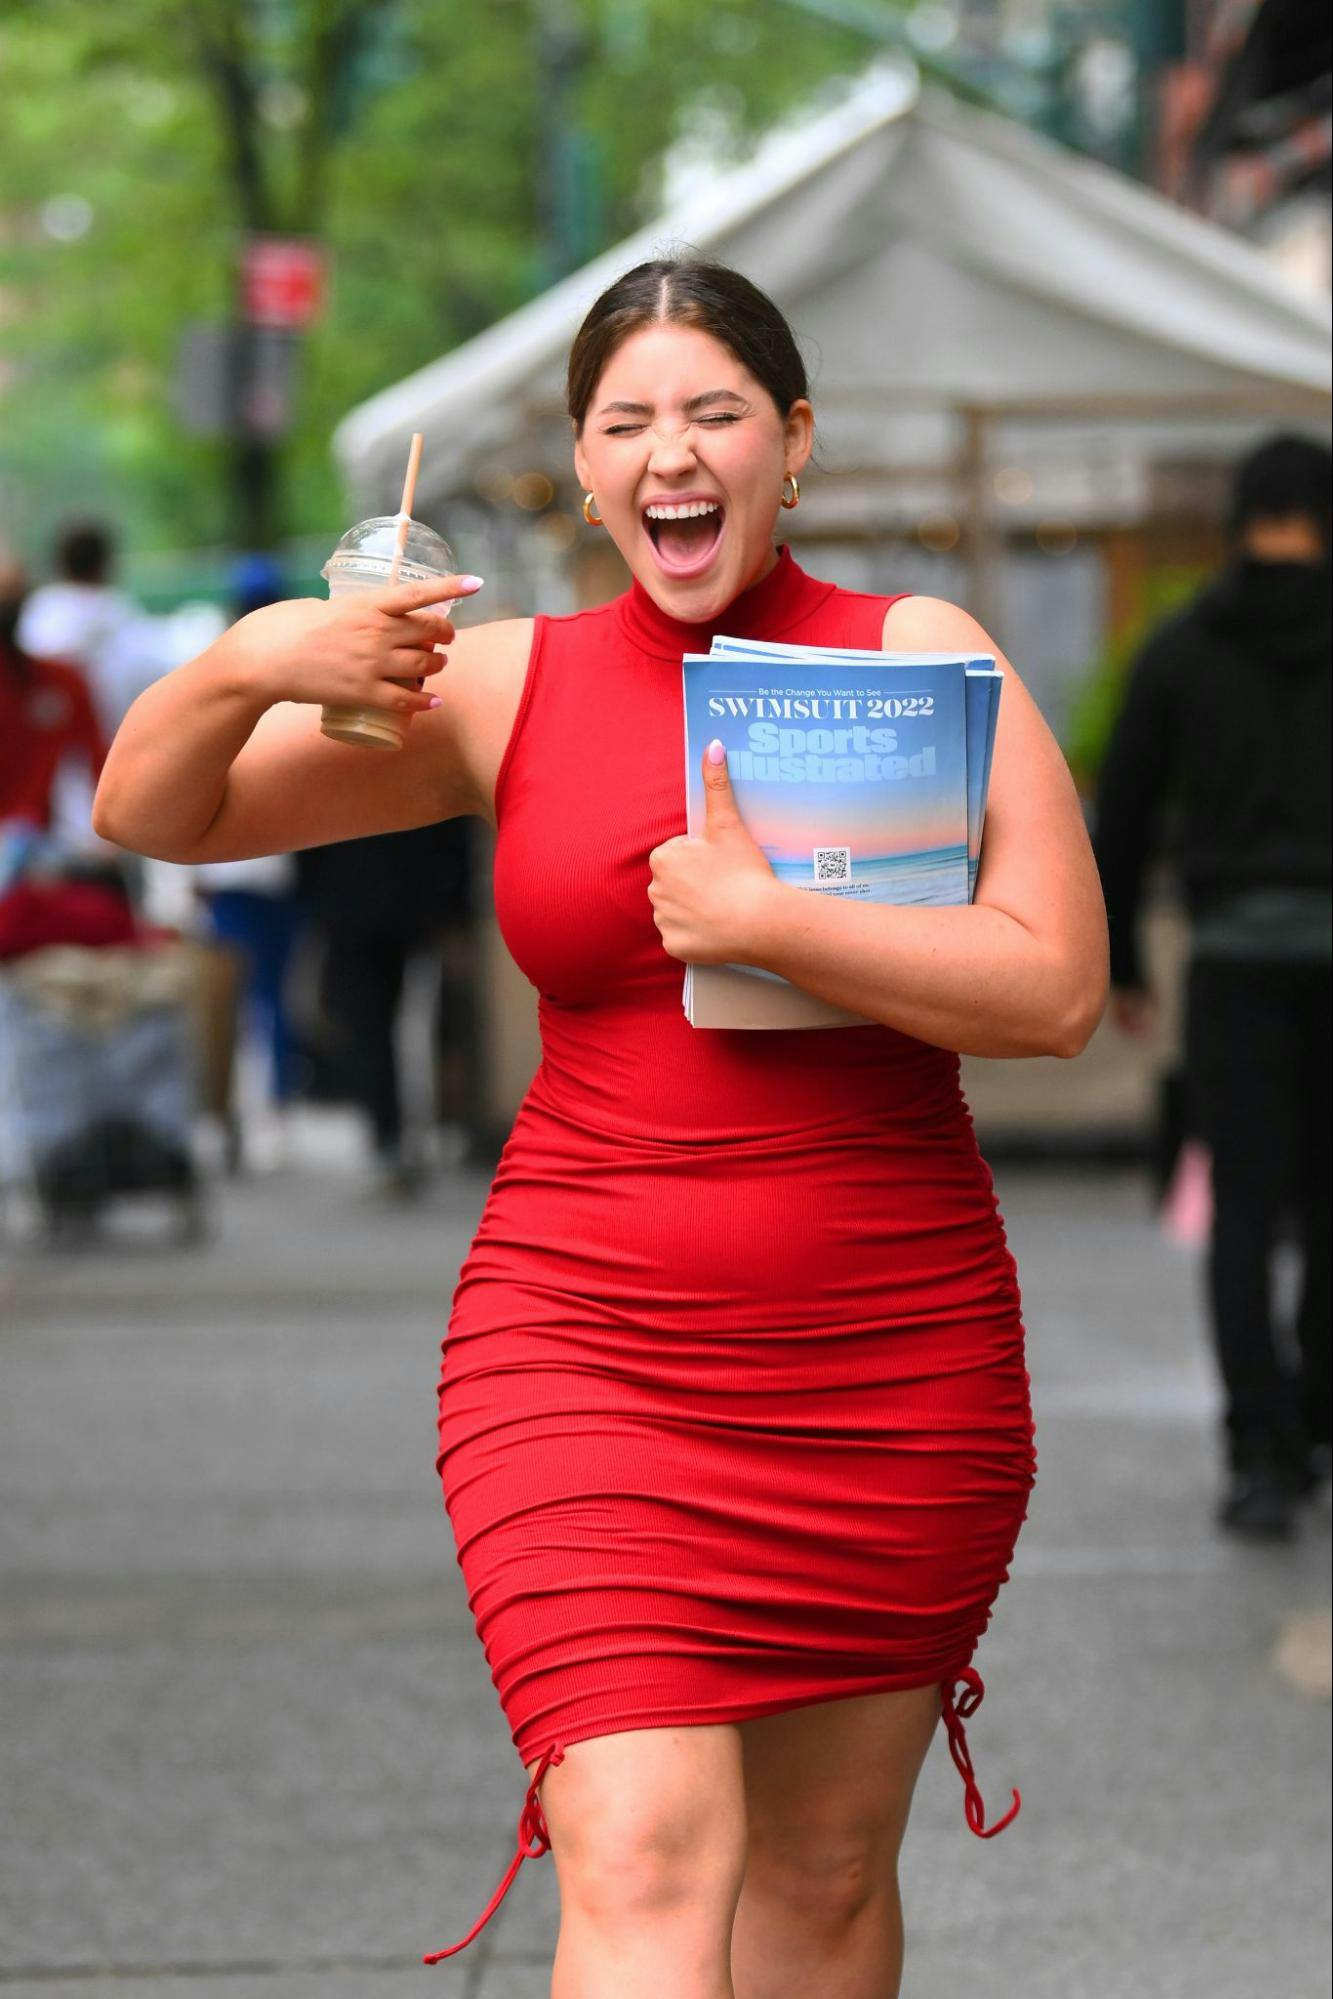 A young woman carrying an iced coffee cries out, grinning, as she holds multiple copies of Sports Illustrated Swimsuit 2022